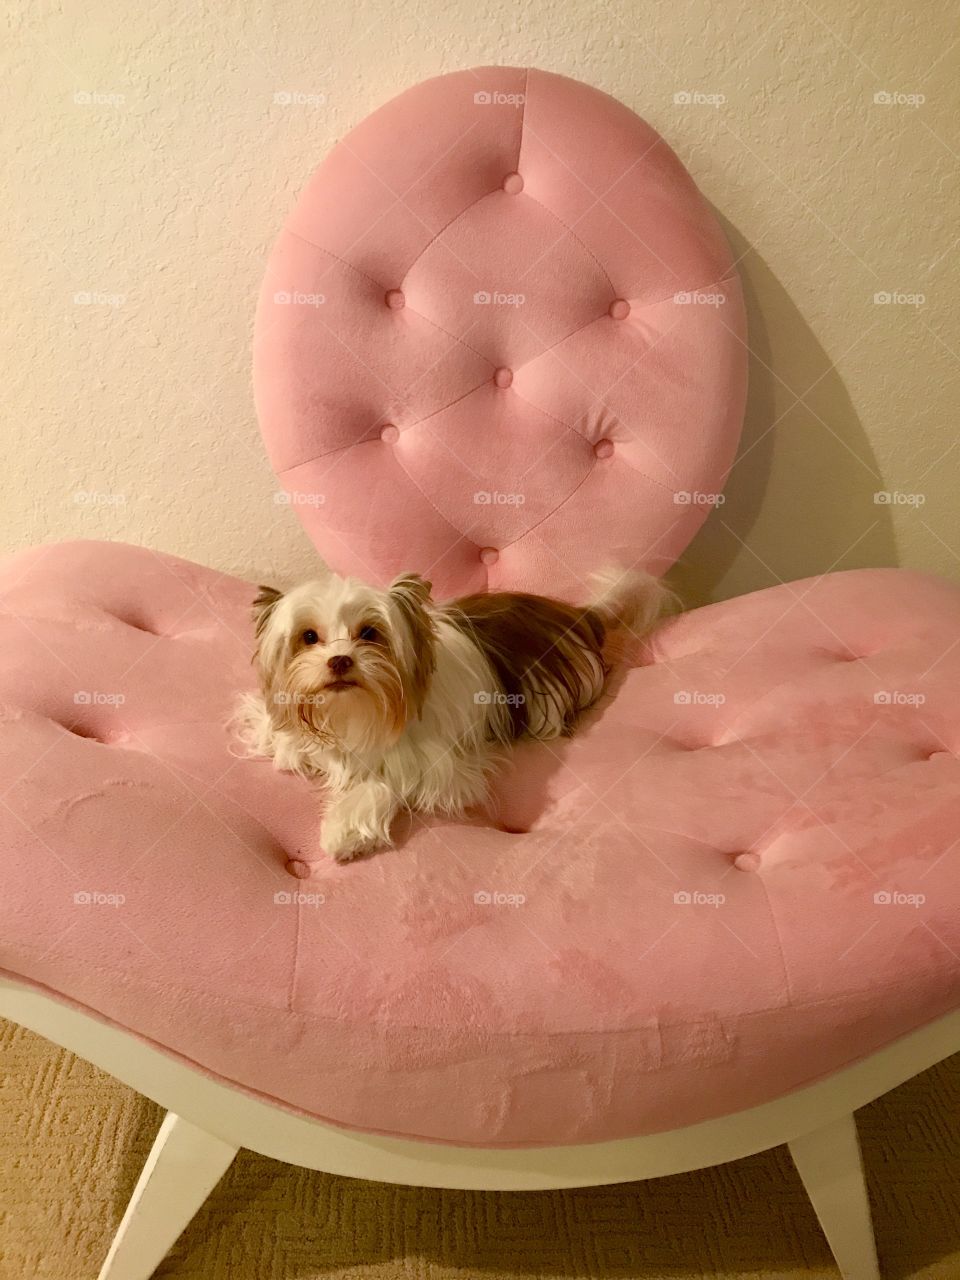 Queen on her throne 